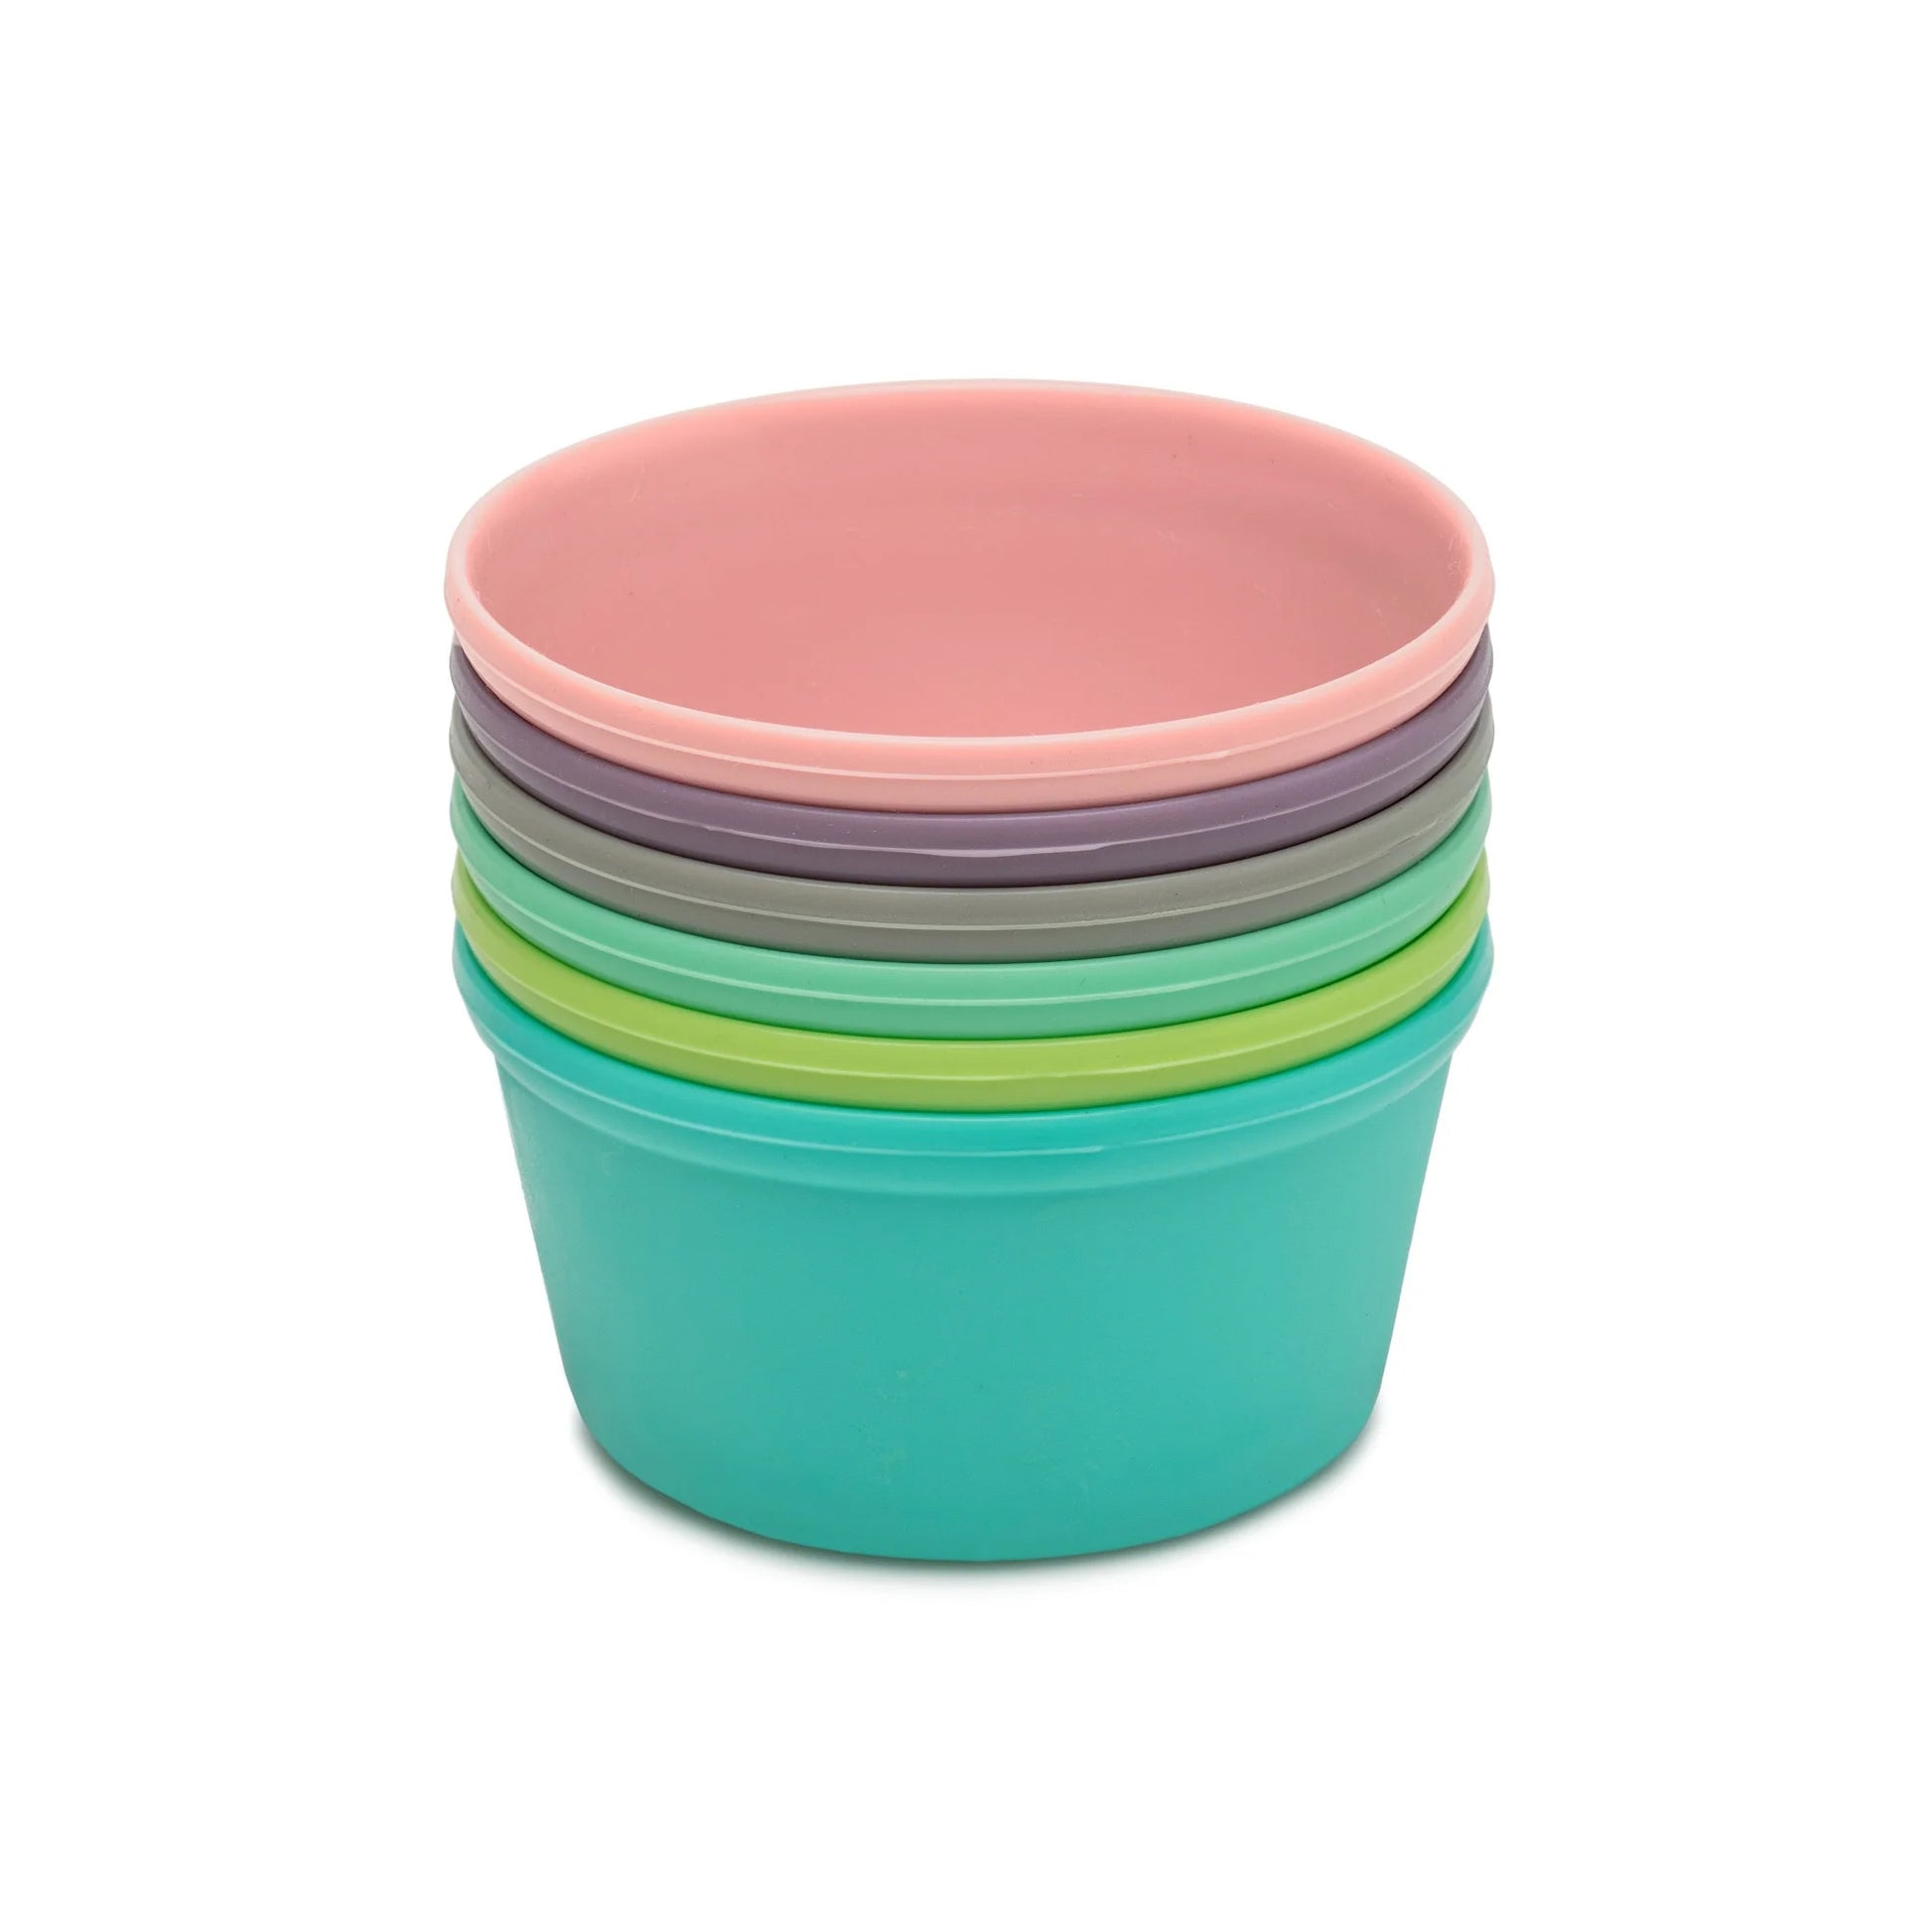 Melii Rainbow Silicone Food Cups for Kids - BPA-Free Rainbow Silicone Food Cups - un Mealtime Separation and Baking, Heat-Resistant, Dishwasher Safe